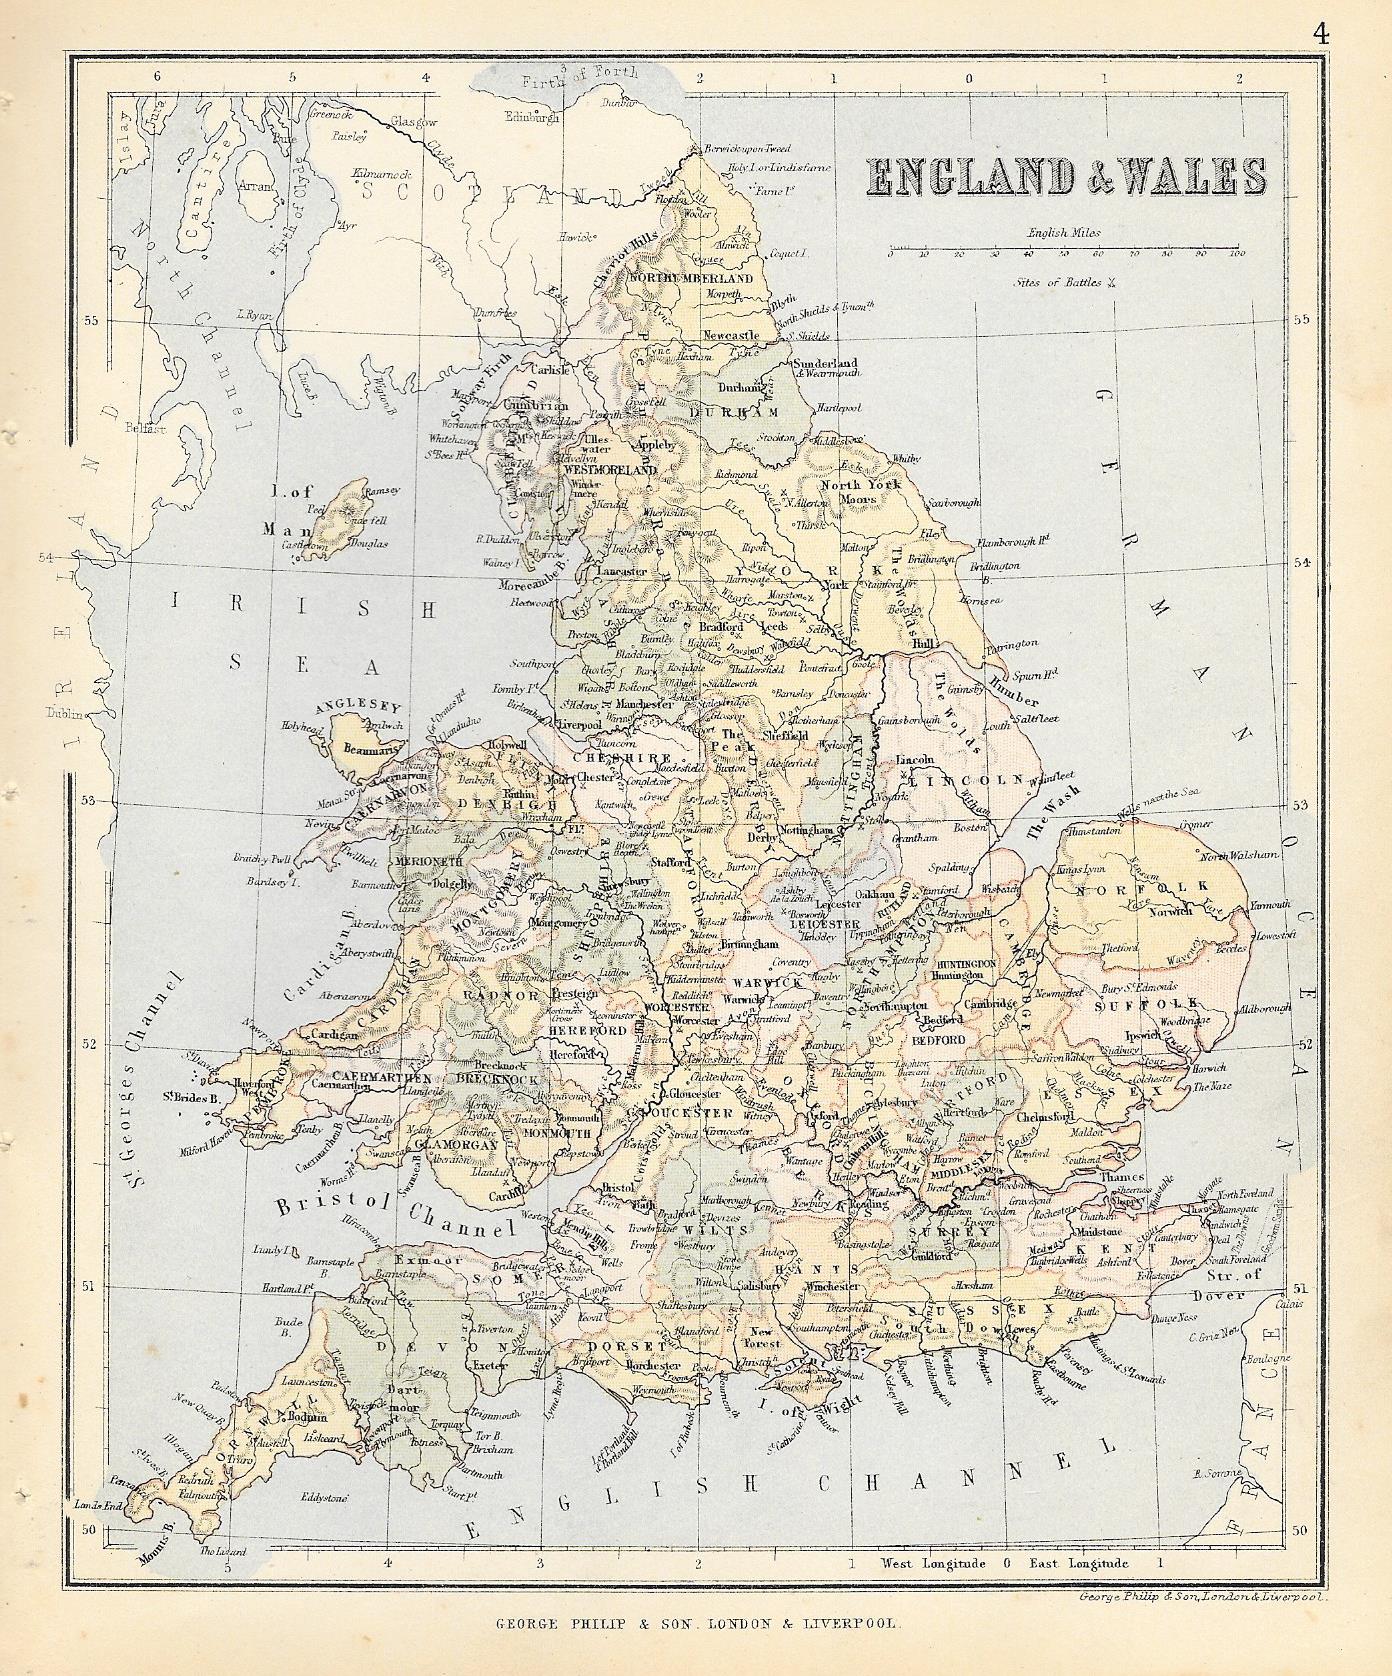 England Wales antique map